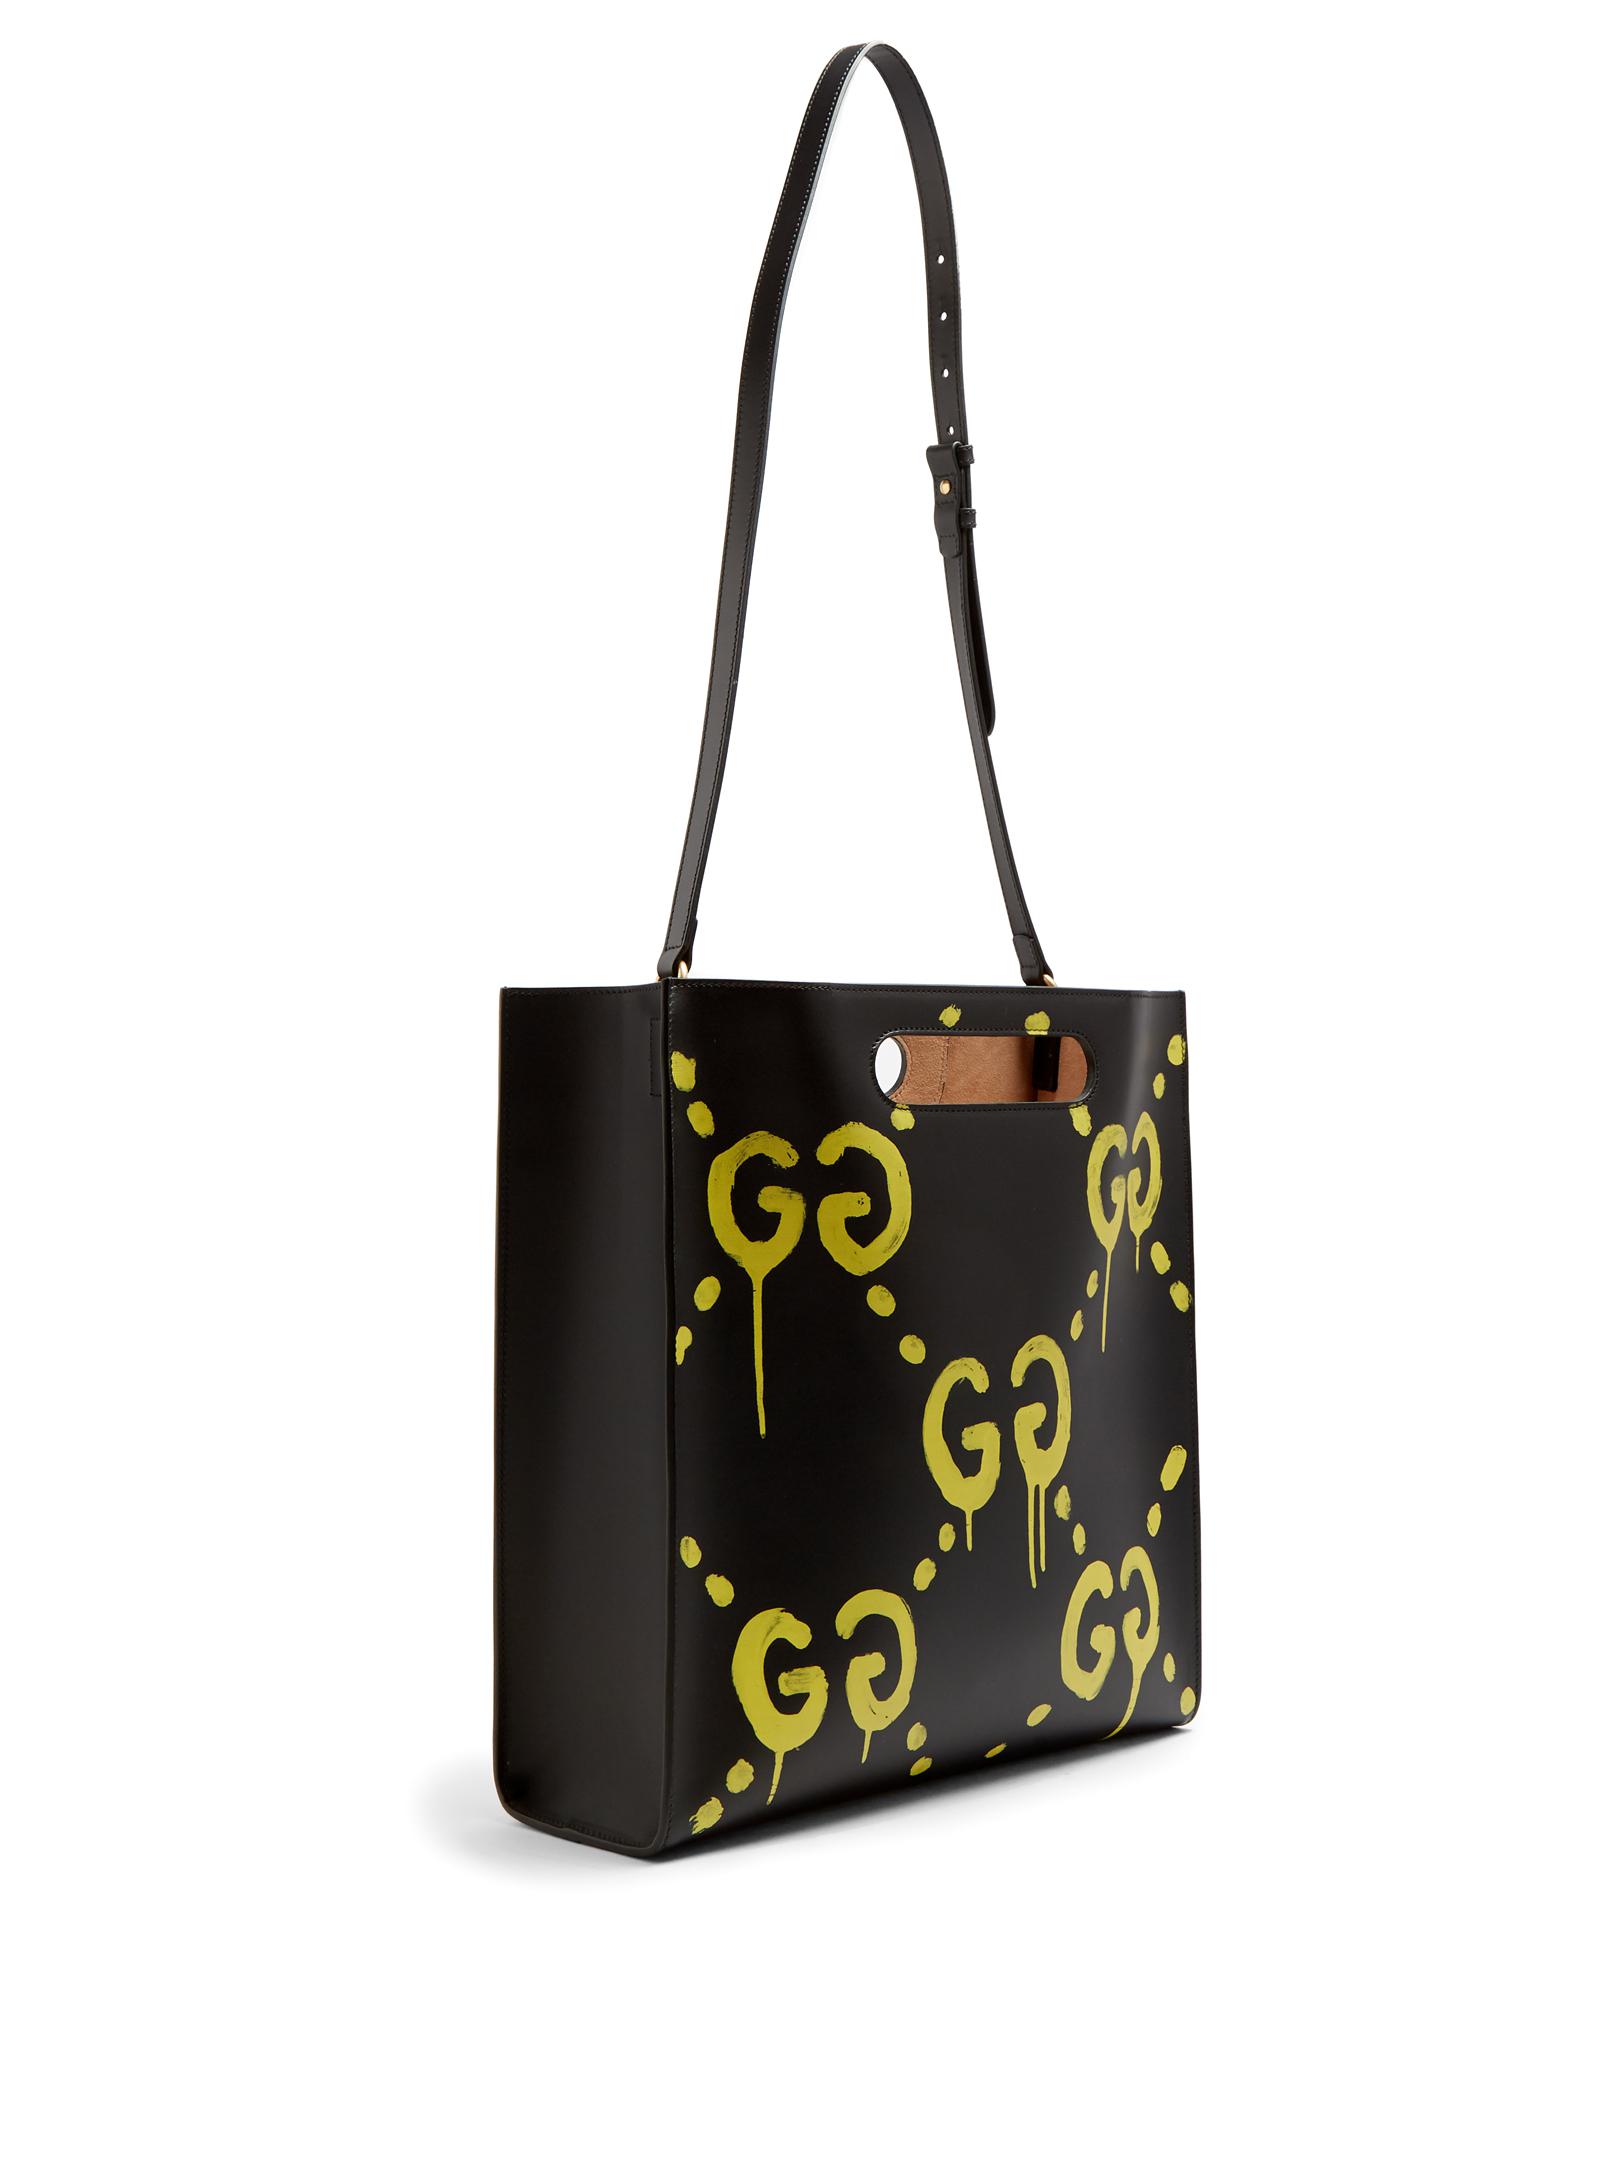 Lyst - Gucci Ghost-print Leather Tote in Black for Men